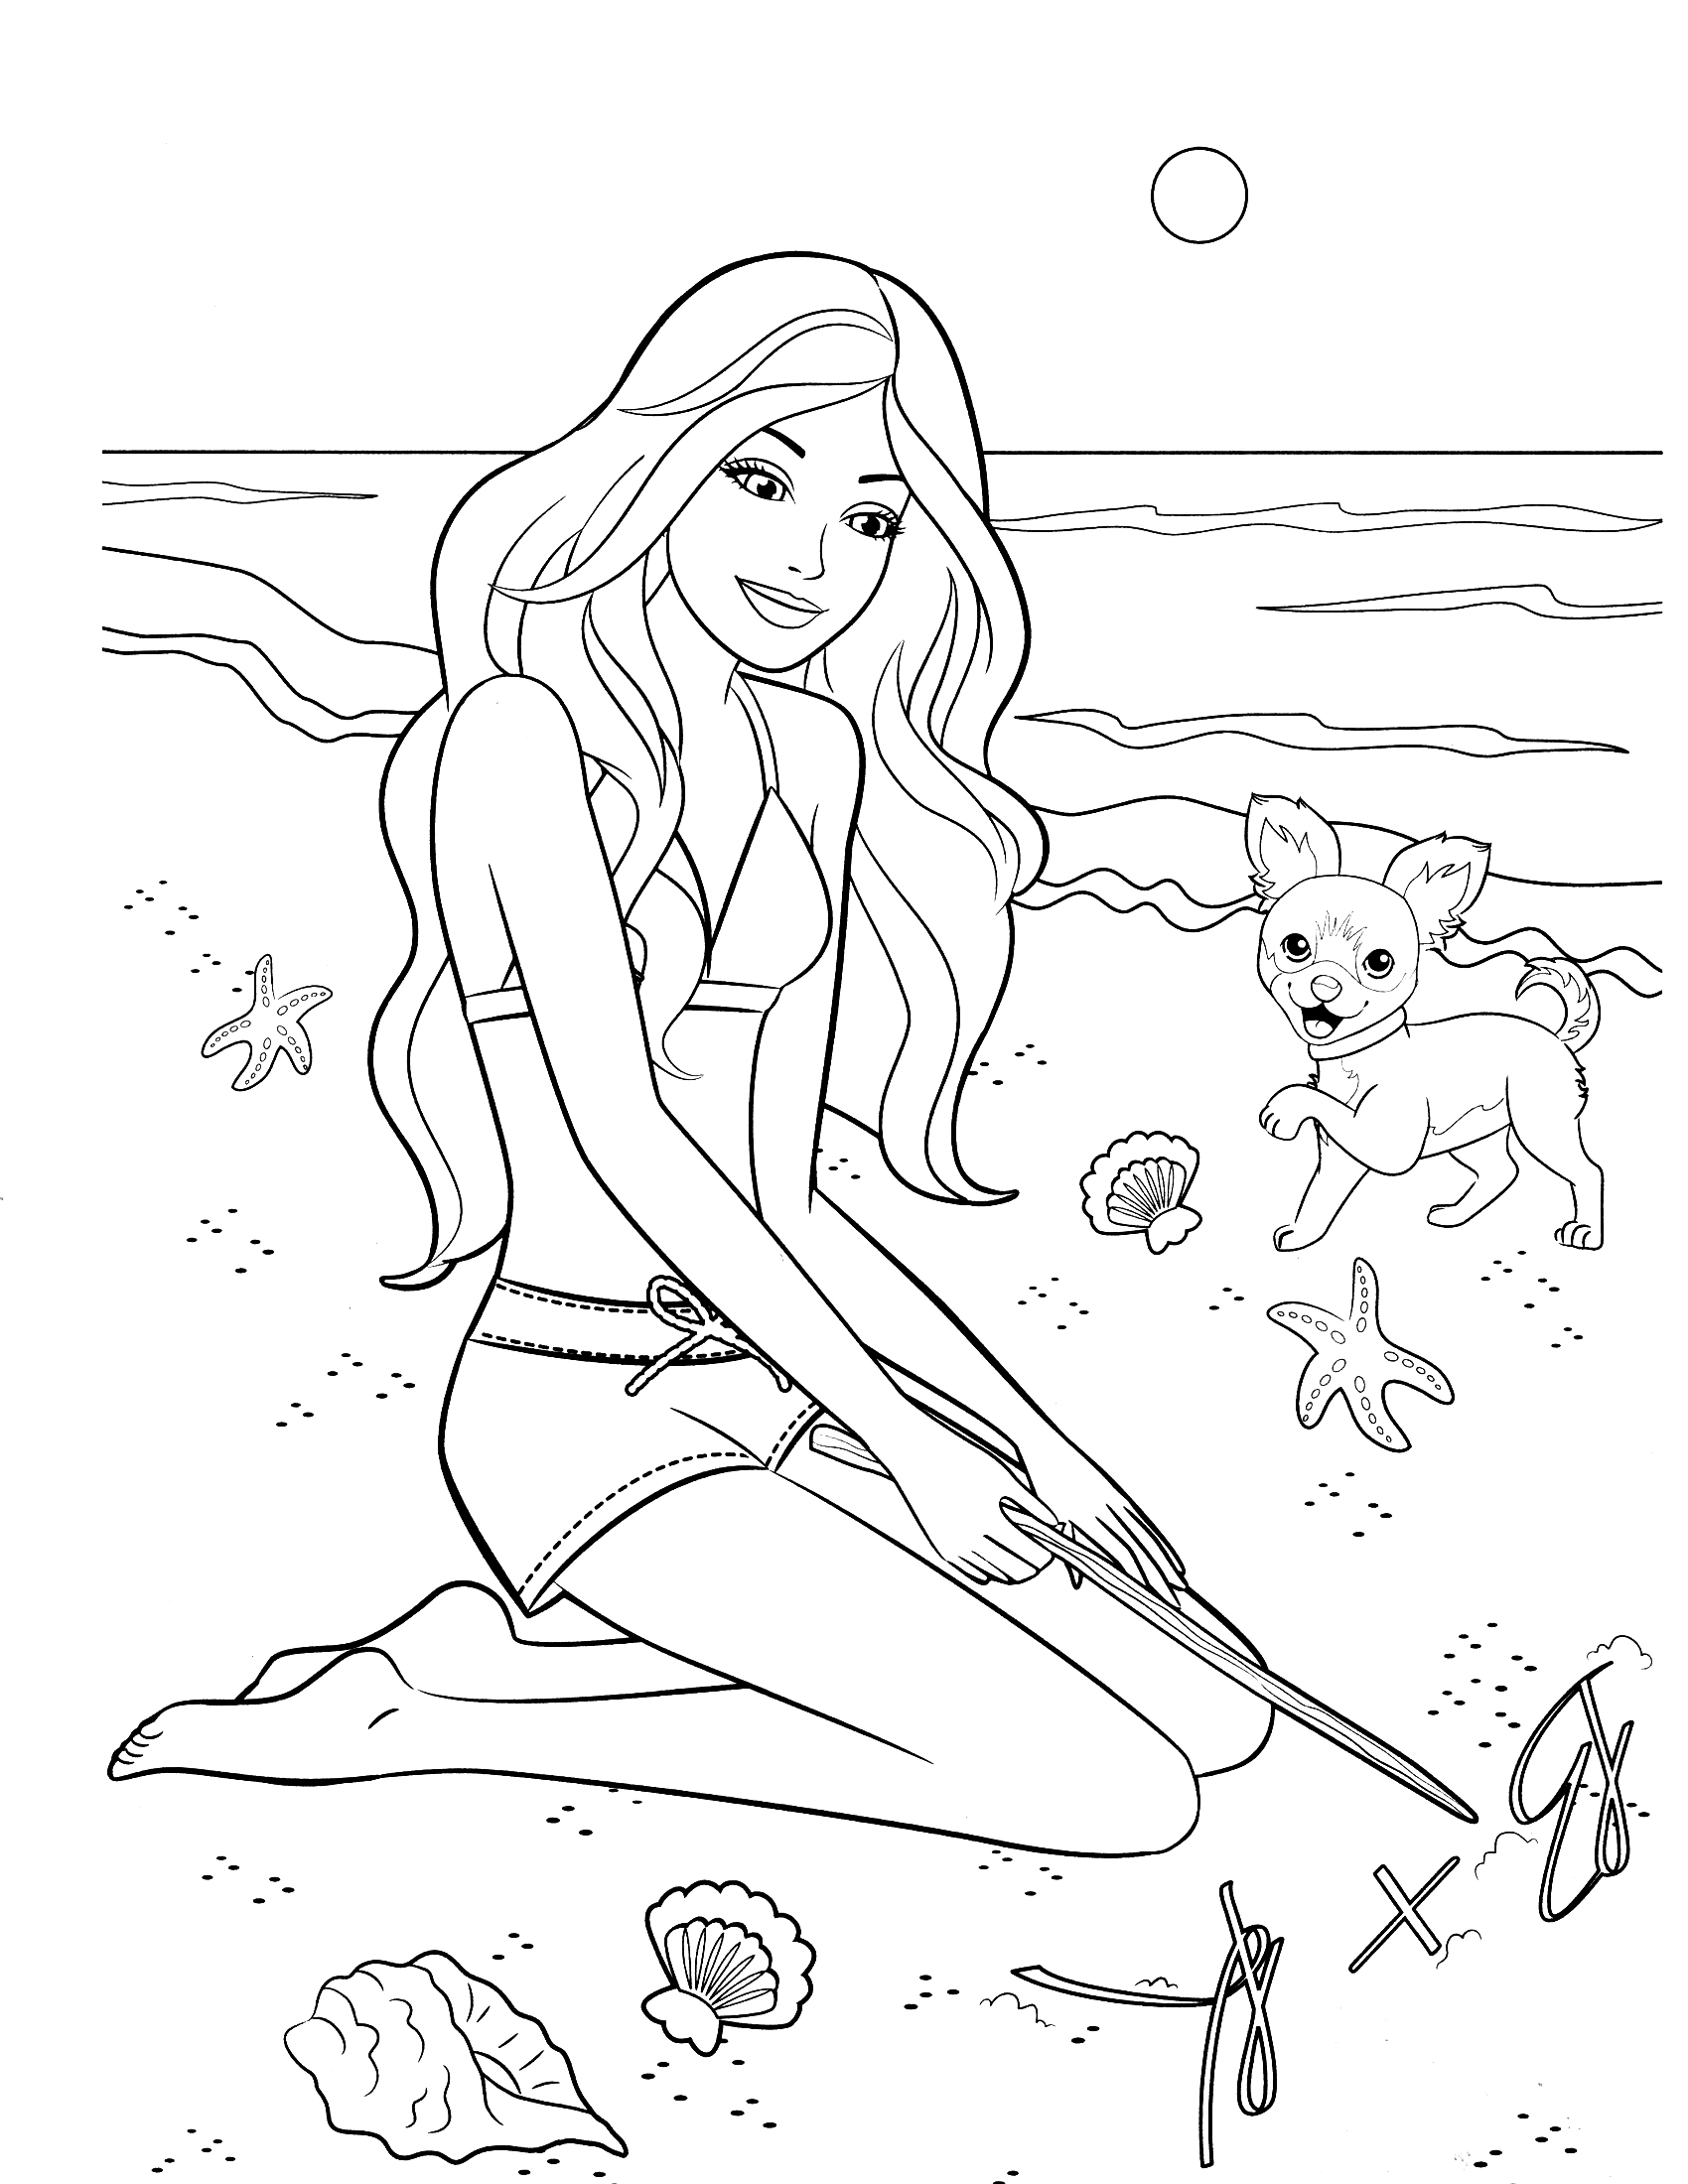 Barbie Playing In The Sand At The Beach Coloring Page